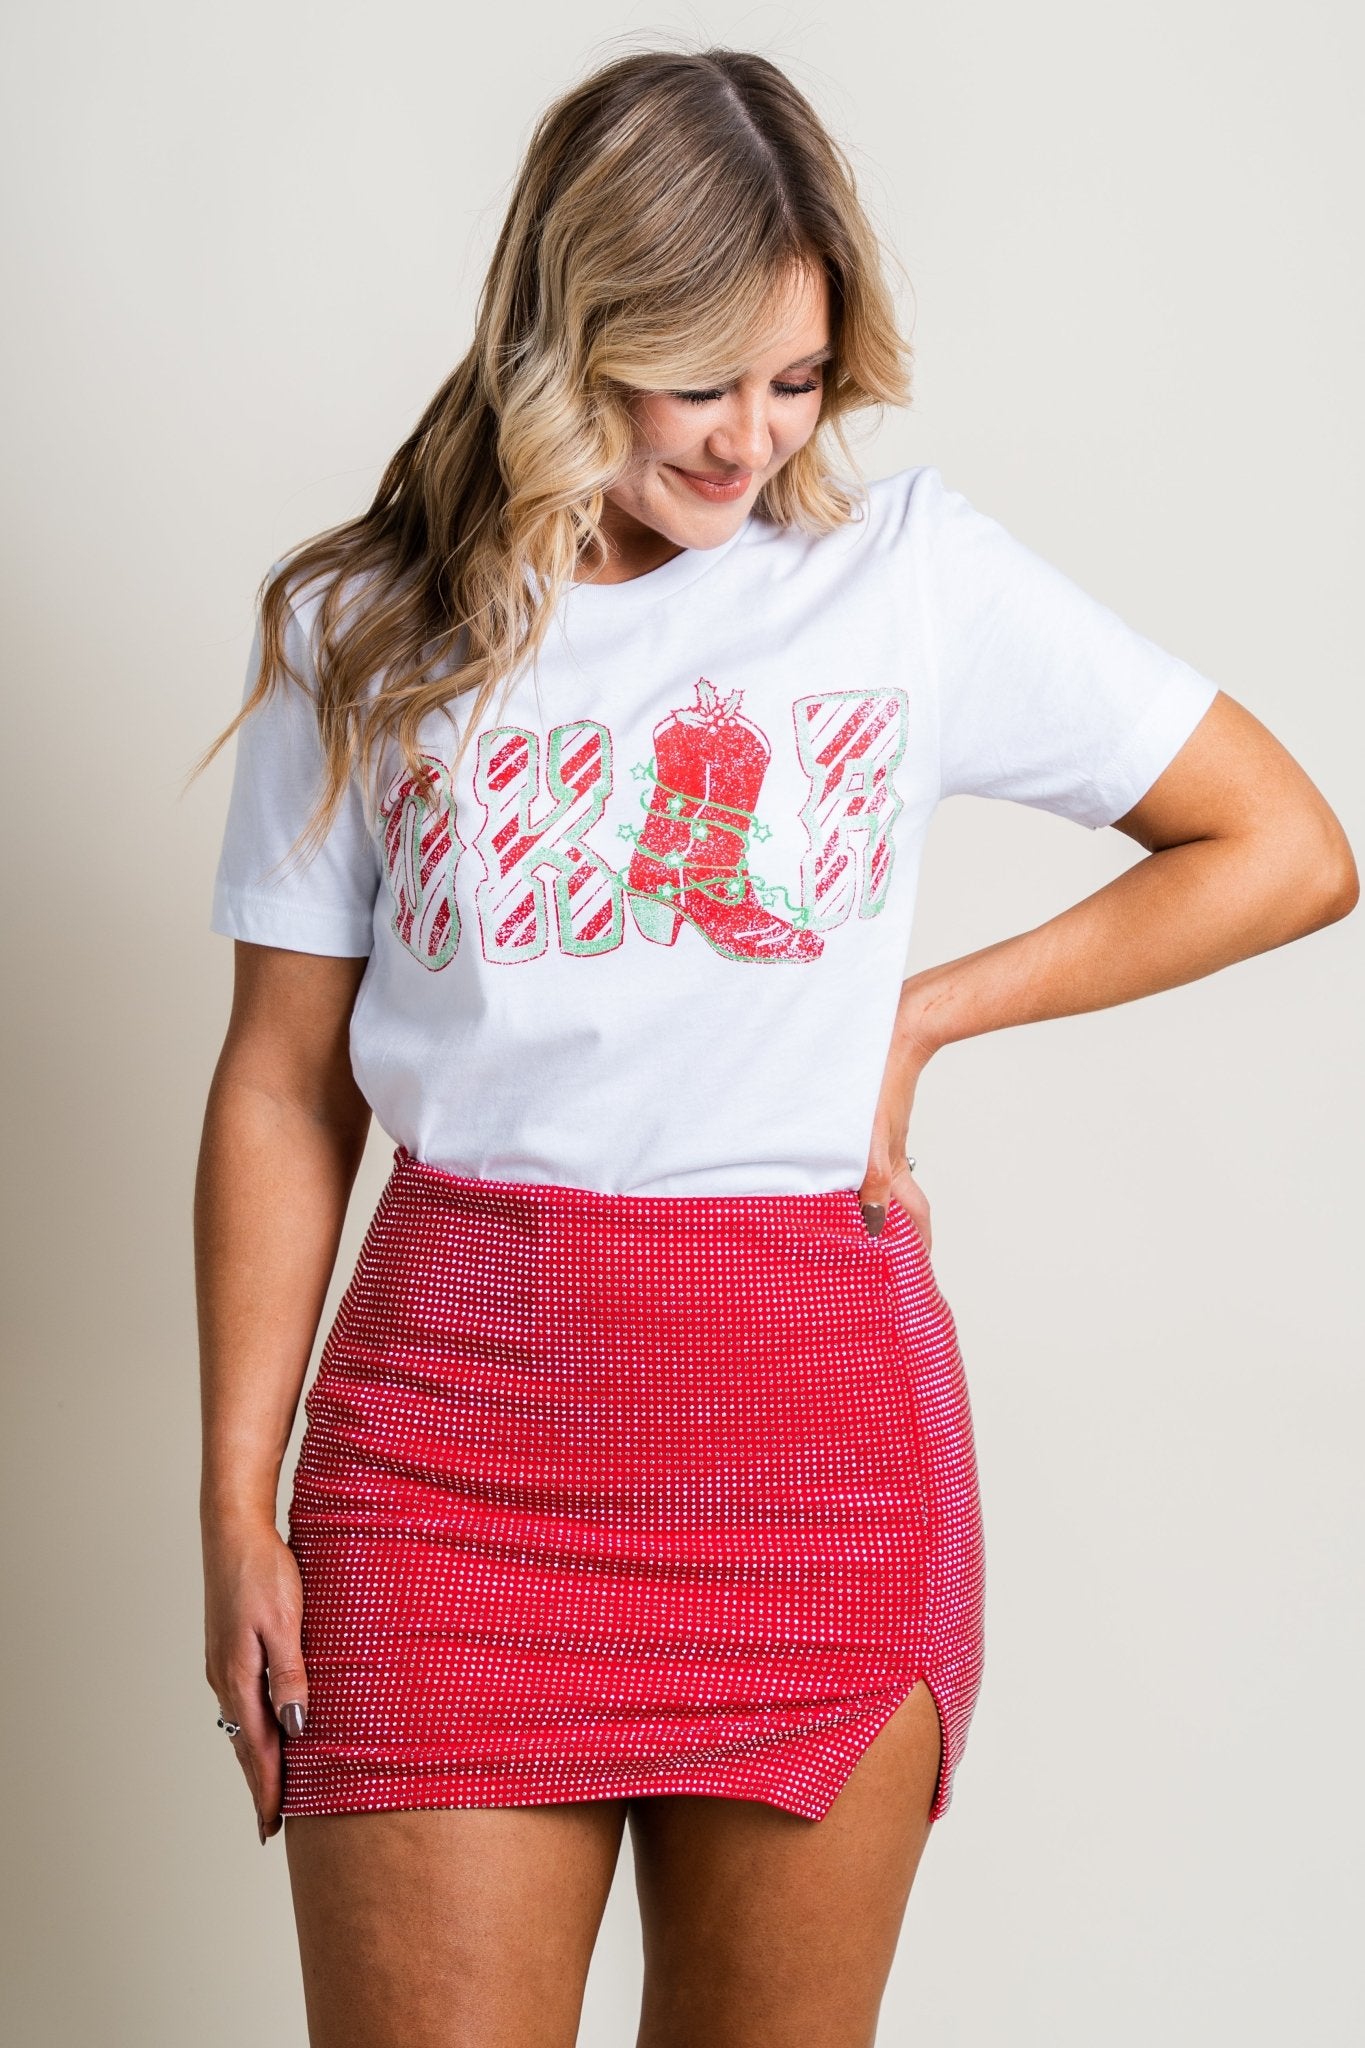 Okla boot candy cane t-shirt white - Affordable t-shirt - Boutique Graphic T-Shirts at Lush Fashion Lounge Boutique in Oklahoma City